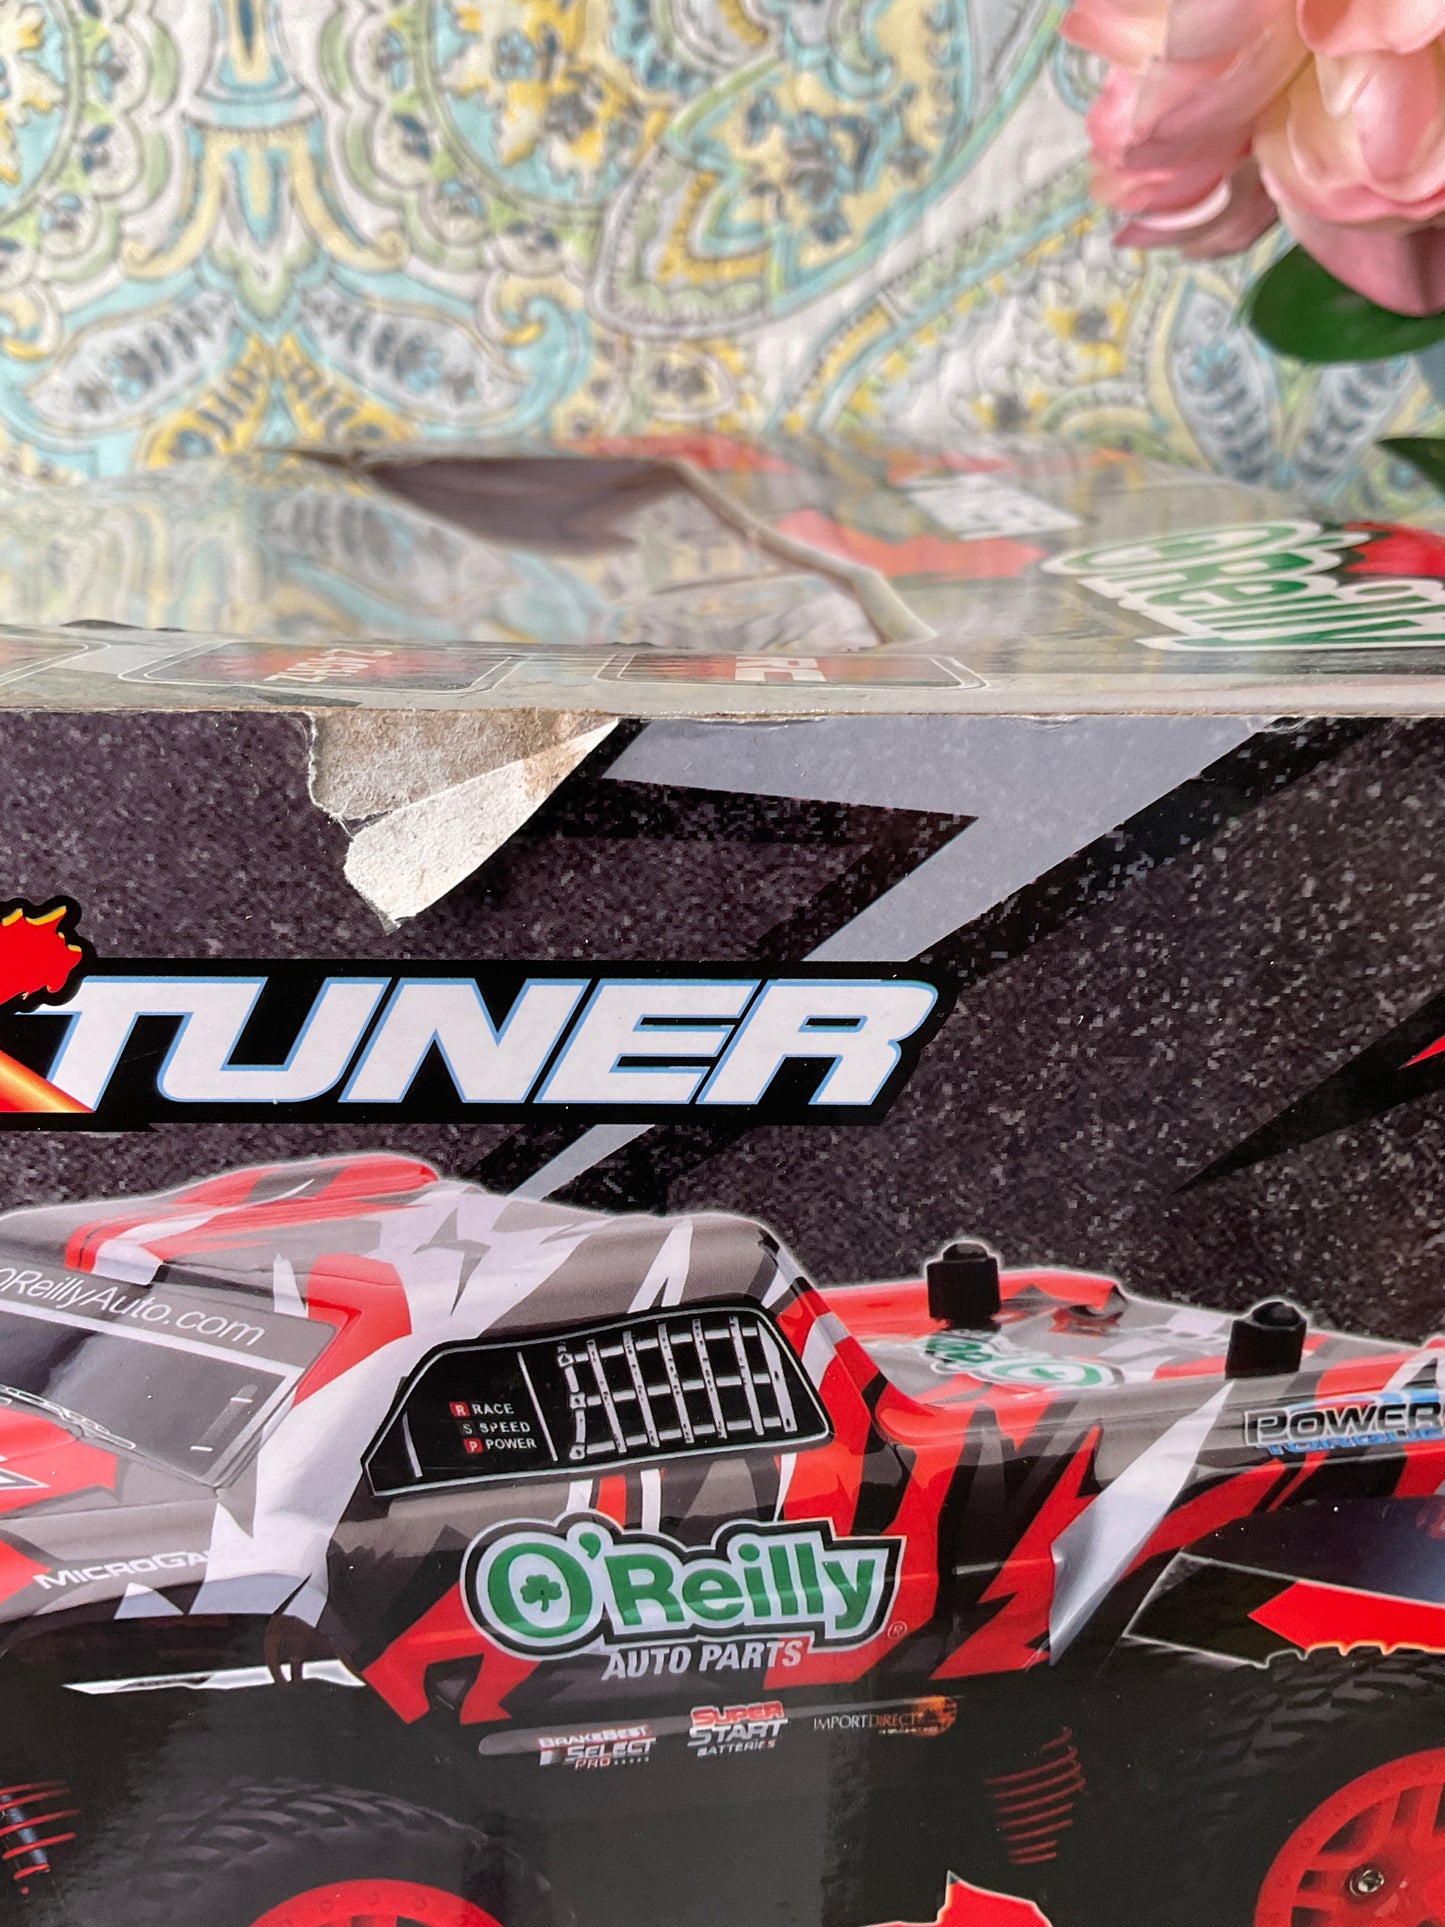 RC XTuner, O'Reilly Auto Parts RC Car